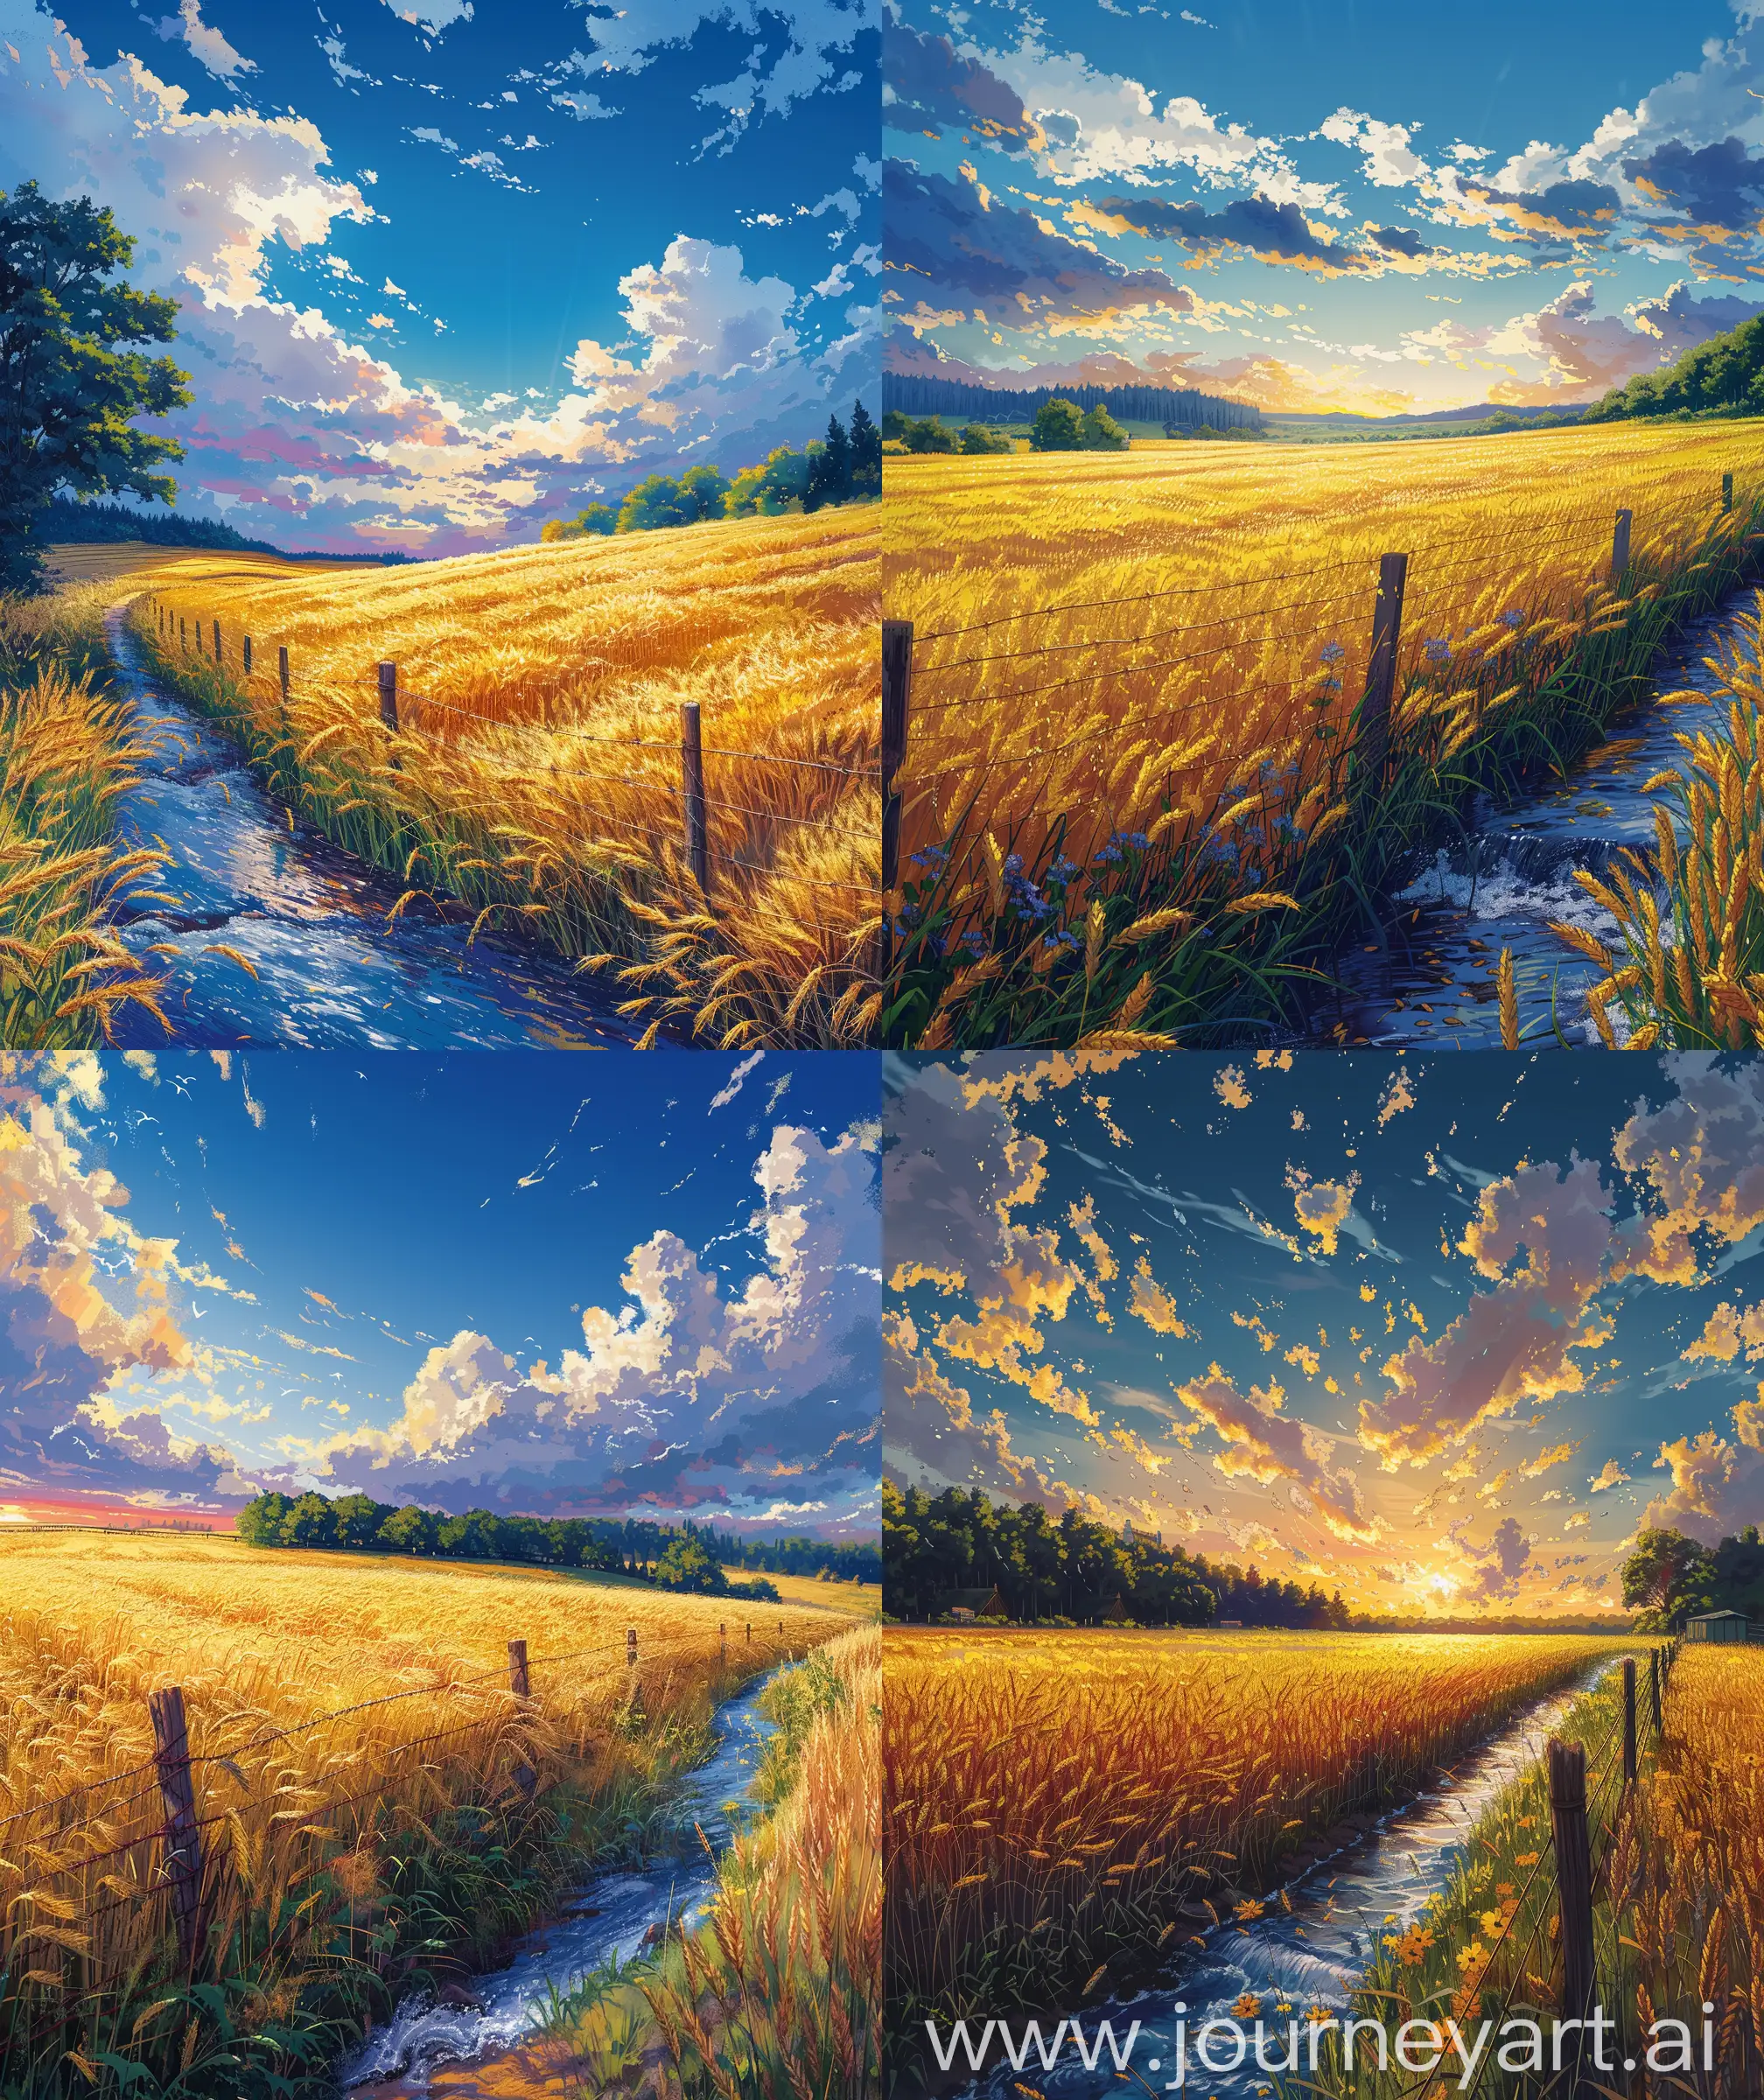 Anime scenary, illustration, mokoto shinkai and Ghibli style mix, front facade view of golden wheat field of zalipie, beautiful sky, morning sky, stream flowing beside field, farming, fence, breeze, summer day time, ultra HD , close up, vibrant look , illustration, anime scenary, sharp details, no hyperrealistic --ar 27:32 --s 400